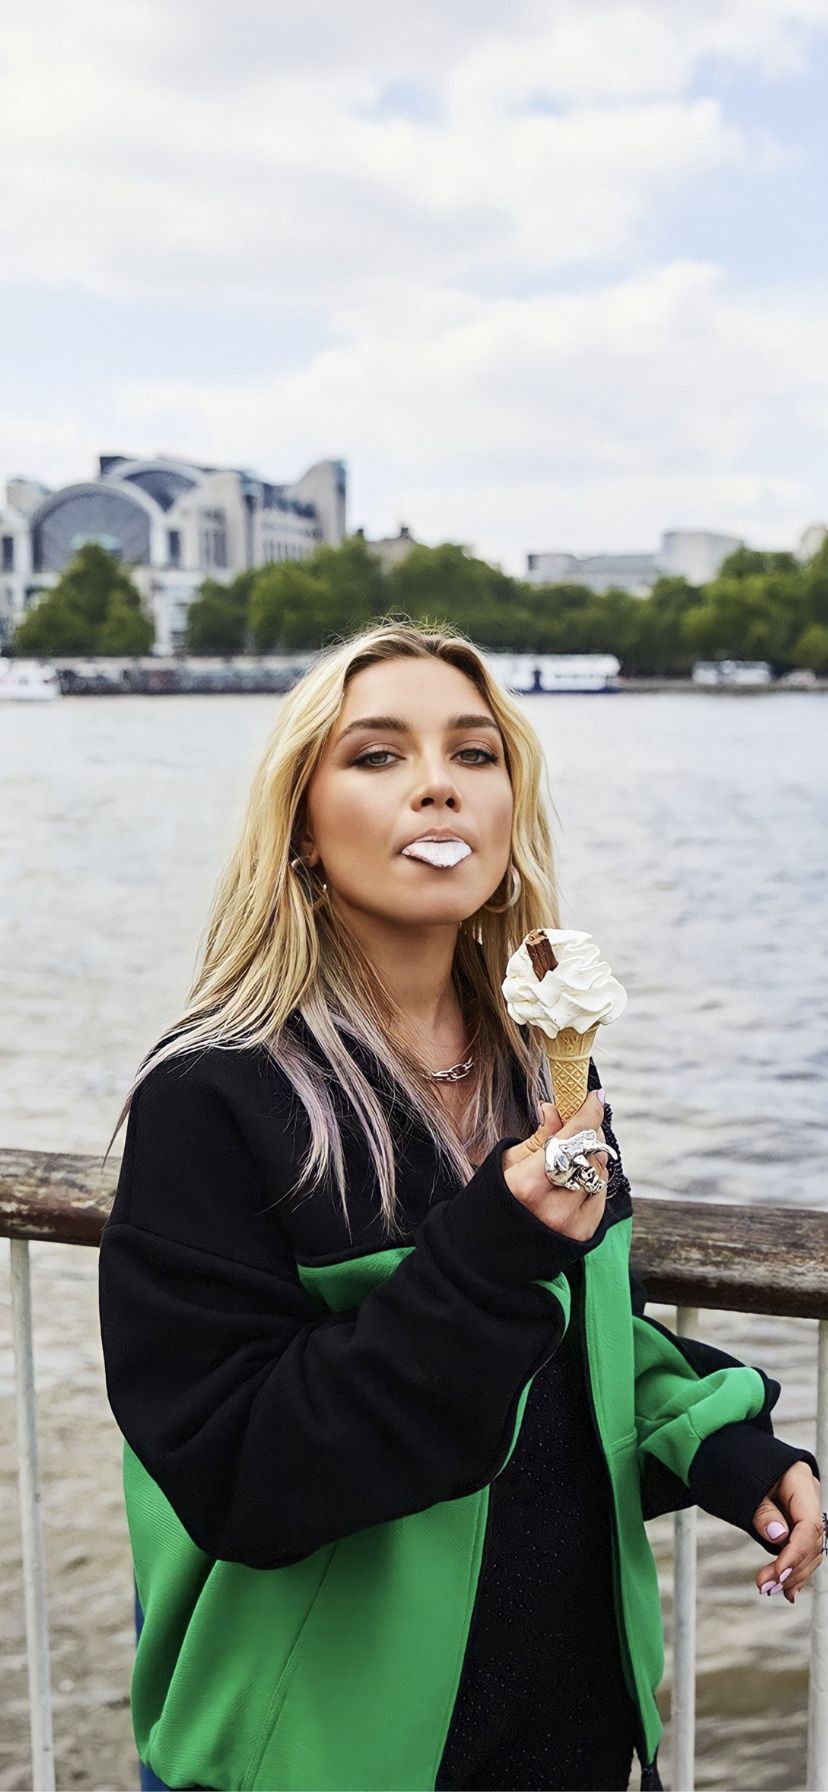 Billie Piper eating an ice cream in front of the River Thames - Florence Pugh